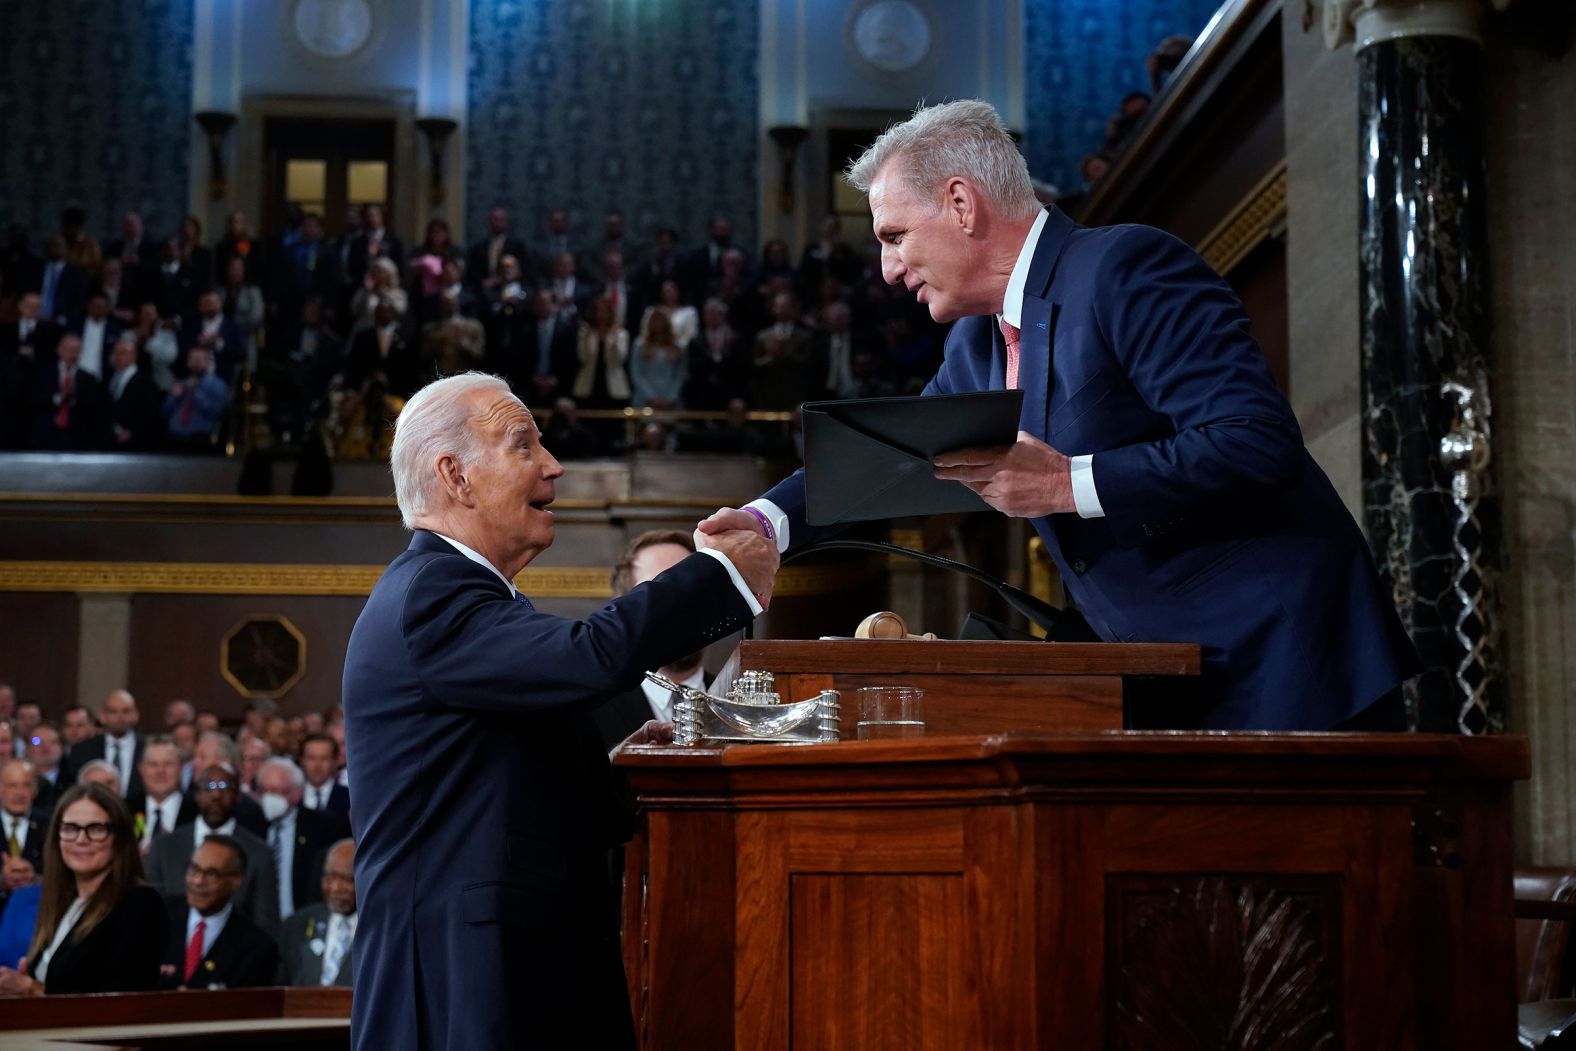 McCarthy shakes hands with Biden before Biden's State of the Union address in February 2023.